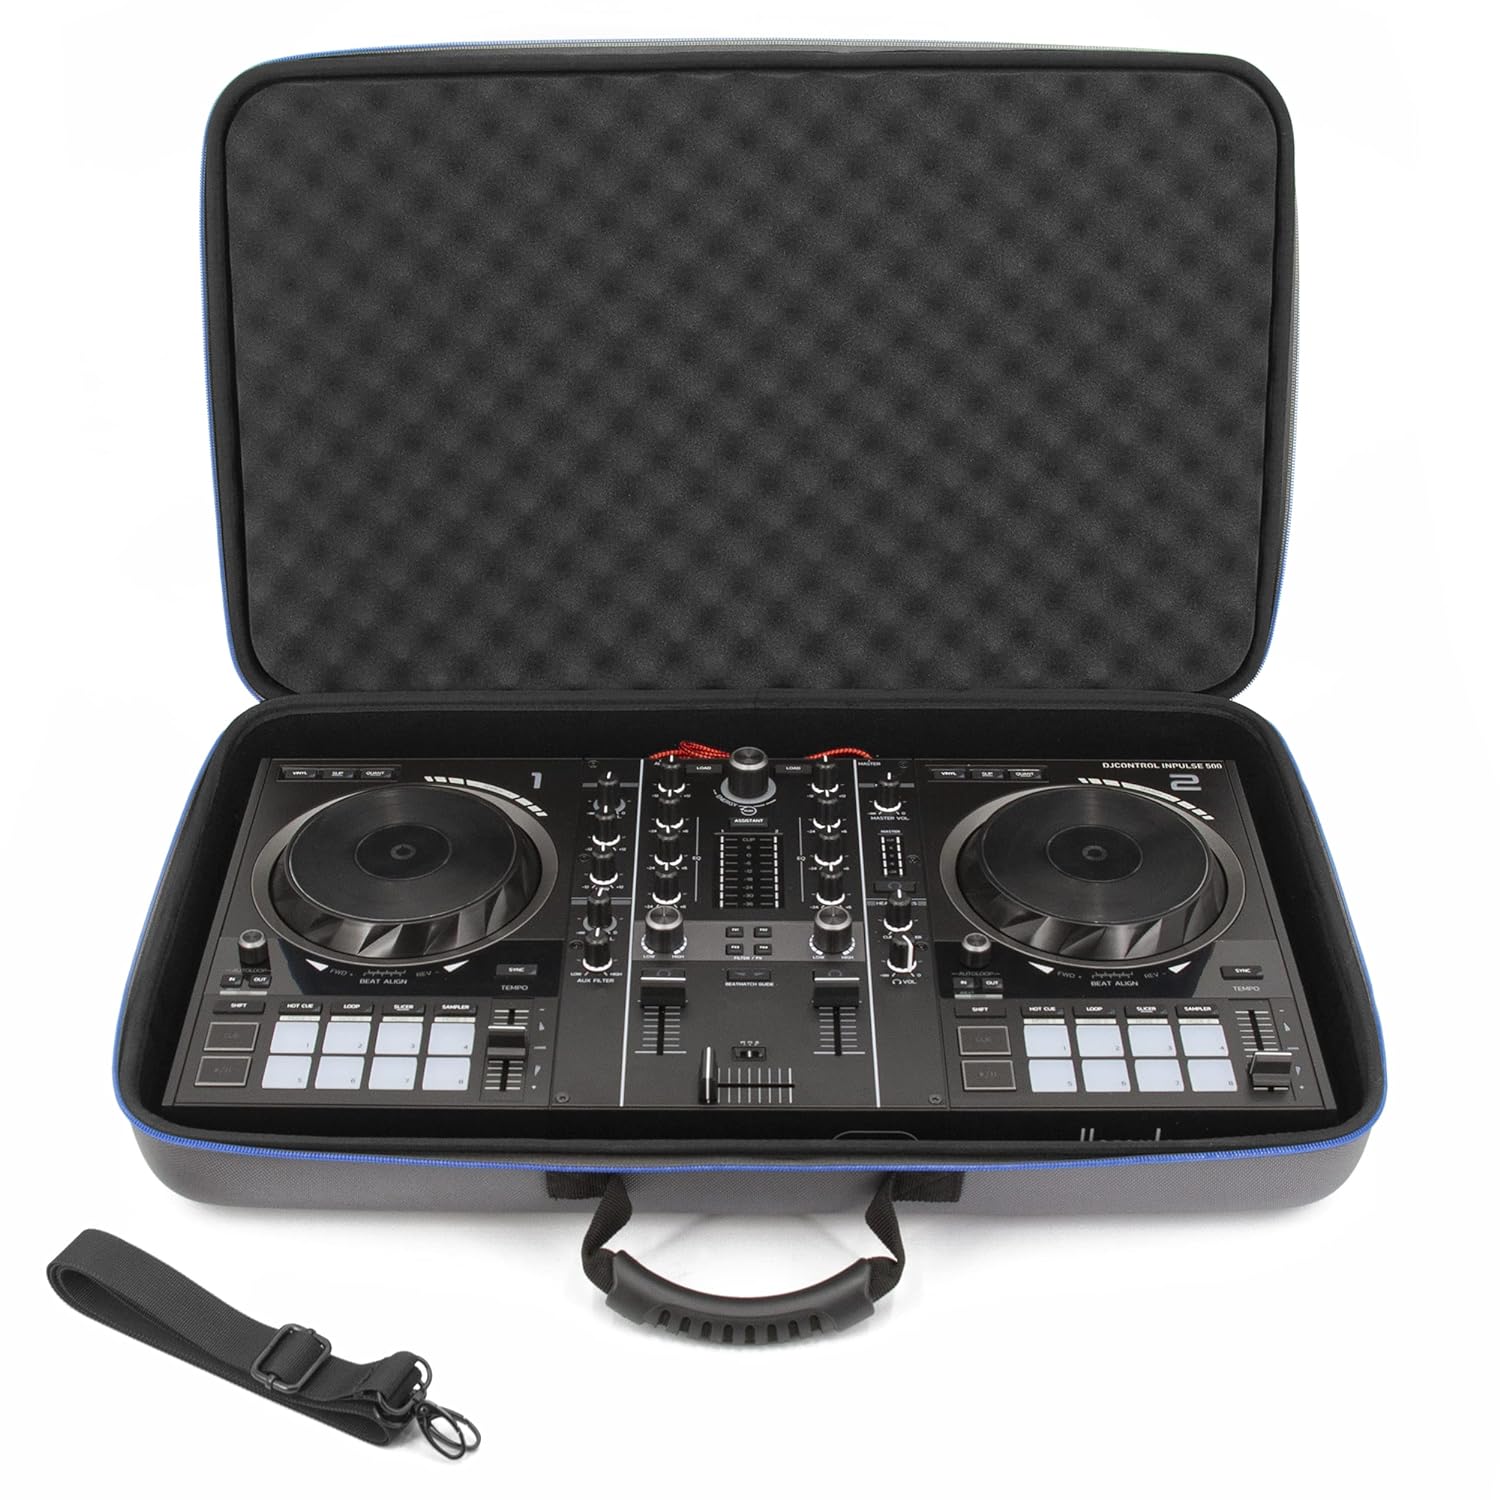 CASEMATIX DJ Controller Travel Case Compatible with Hercules Inpulse 500 - Hard Shell DJ Mixer Carrying Case with Shoulder Strap & Impact-Absorbing Foam Compatible with Hercules DJControl Inpulse 500